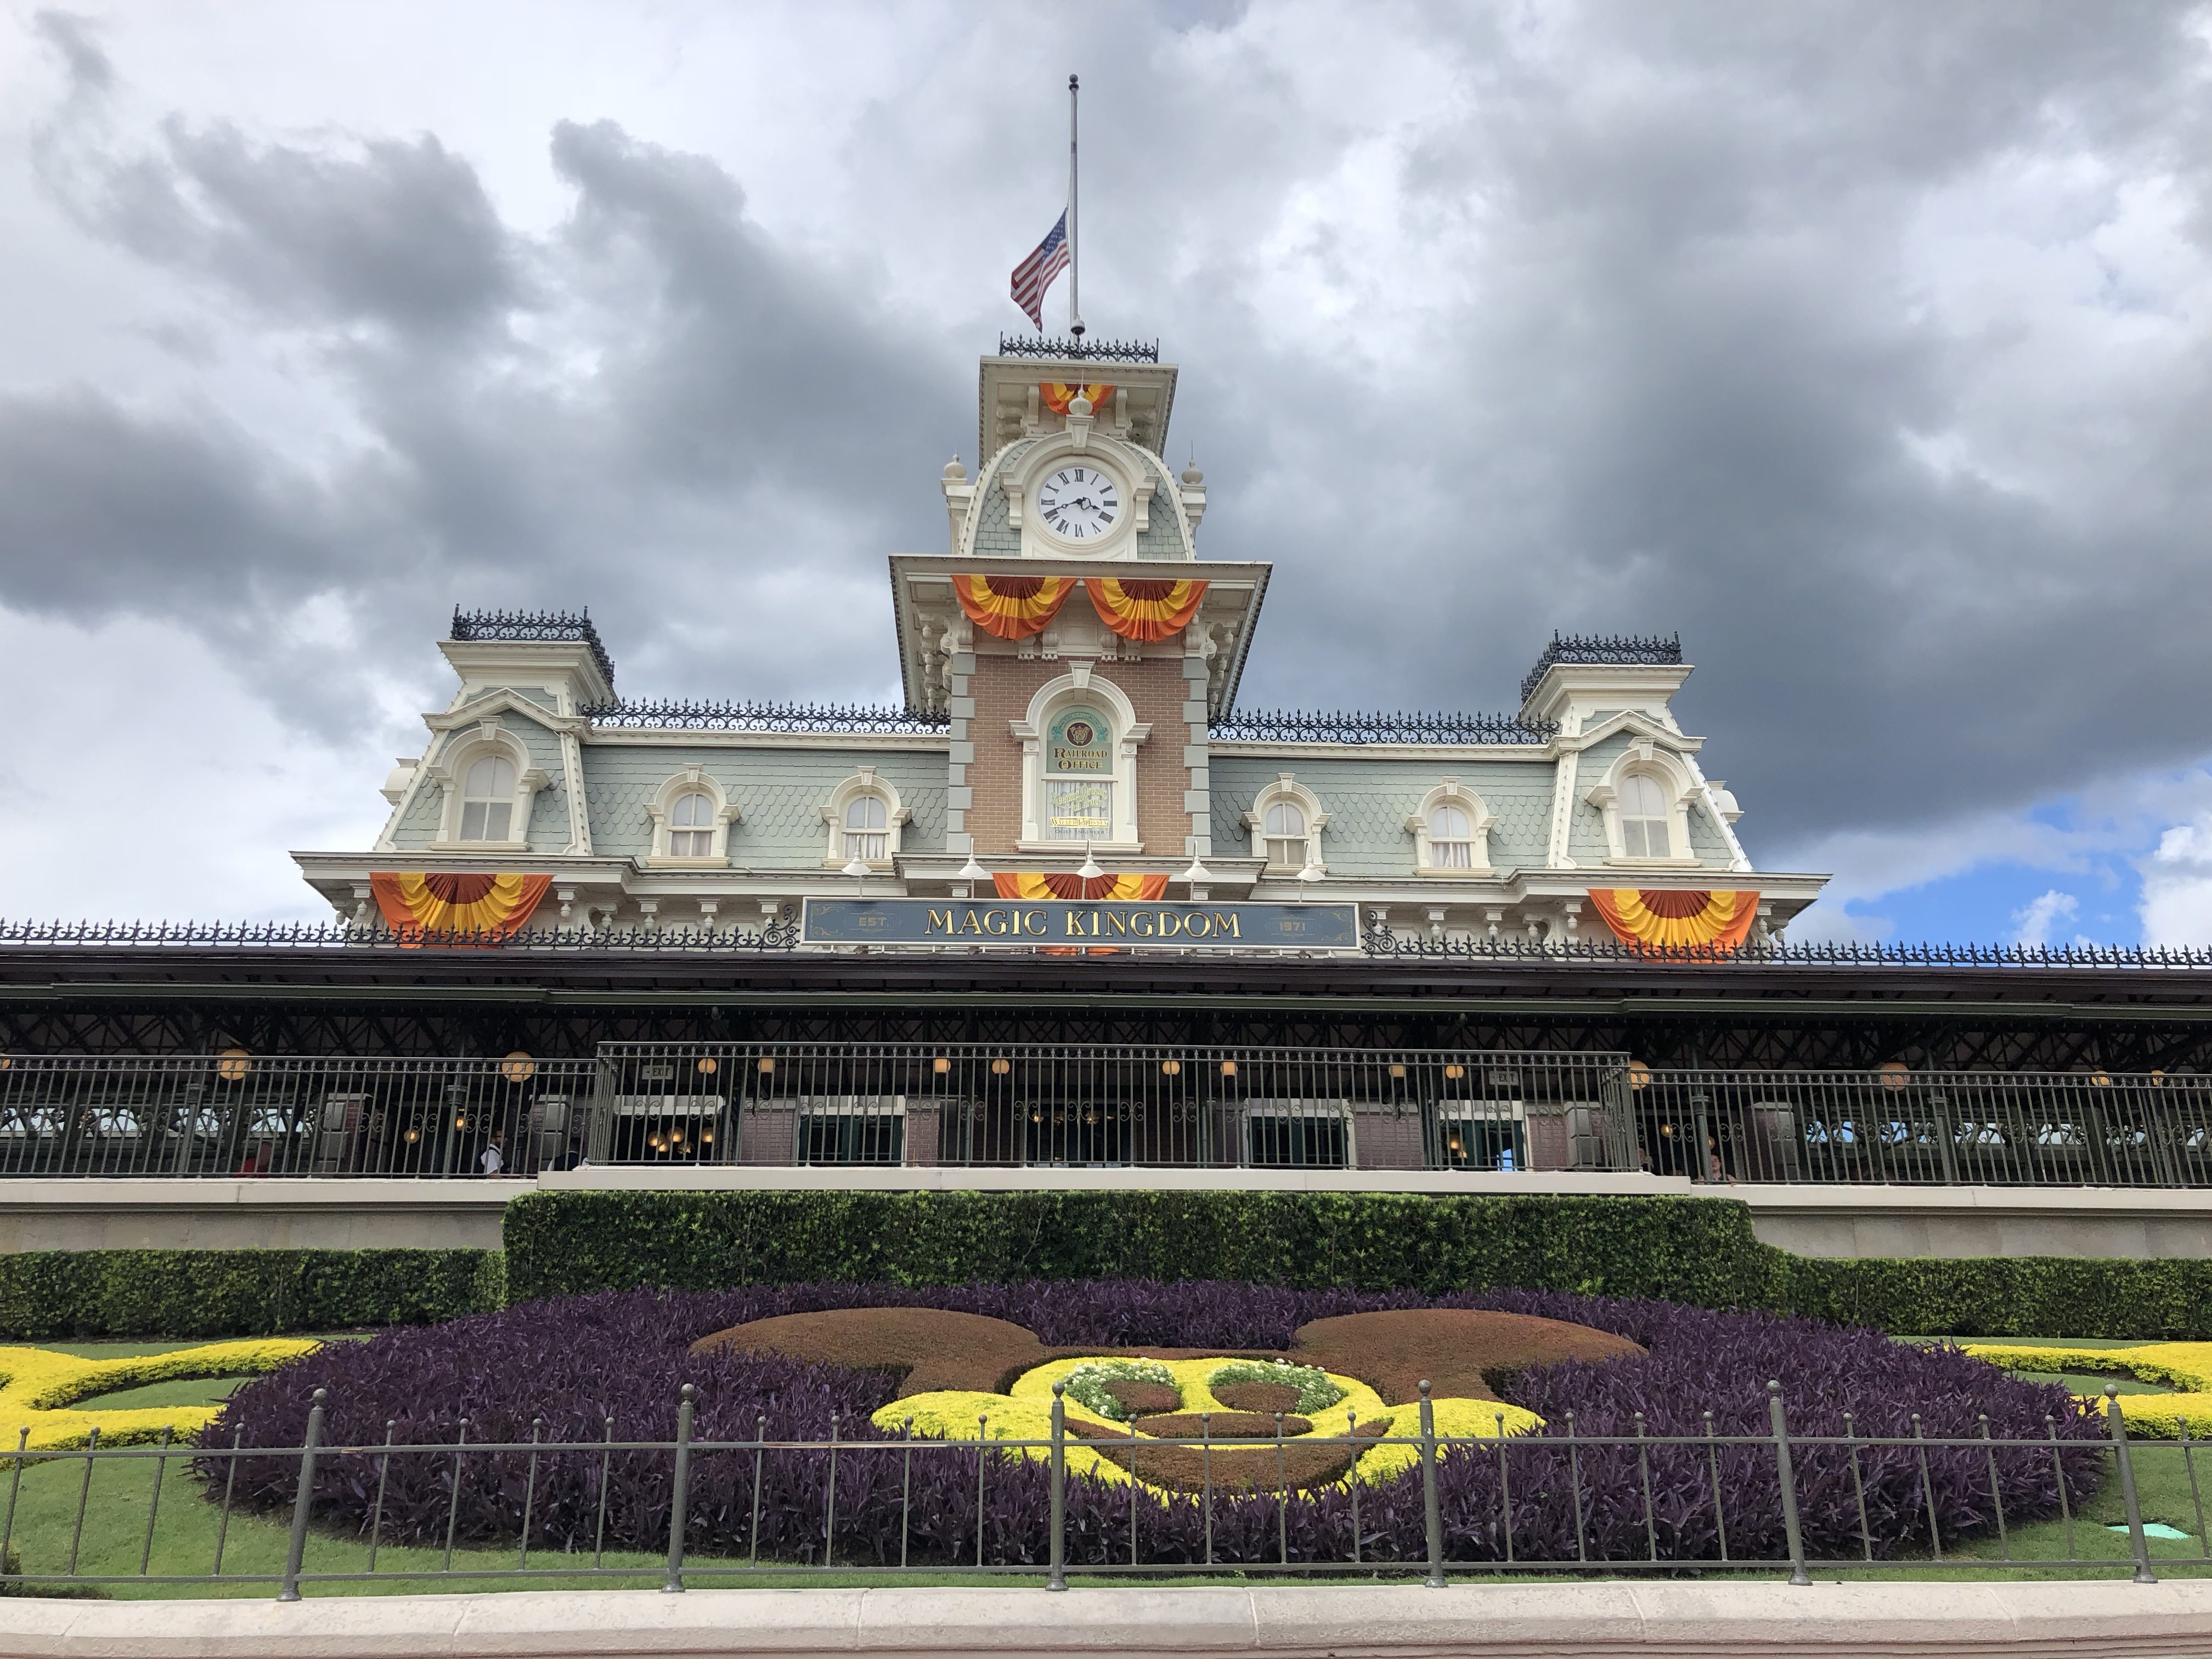 rain clouds abouve the train station at the entrance to the Magic Kingsom at Walt Disney World